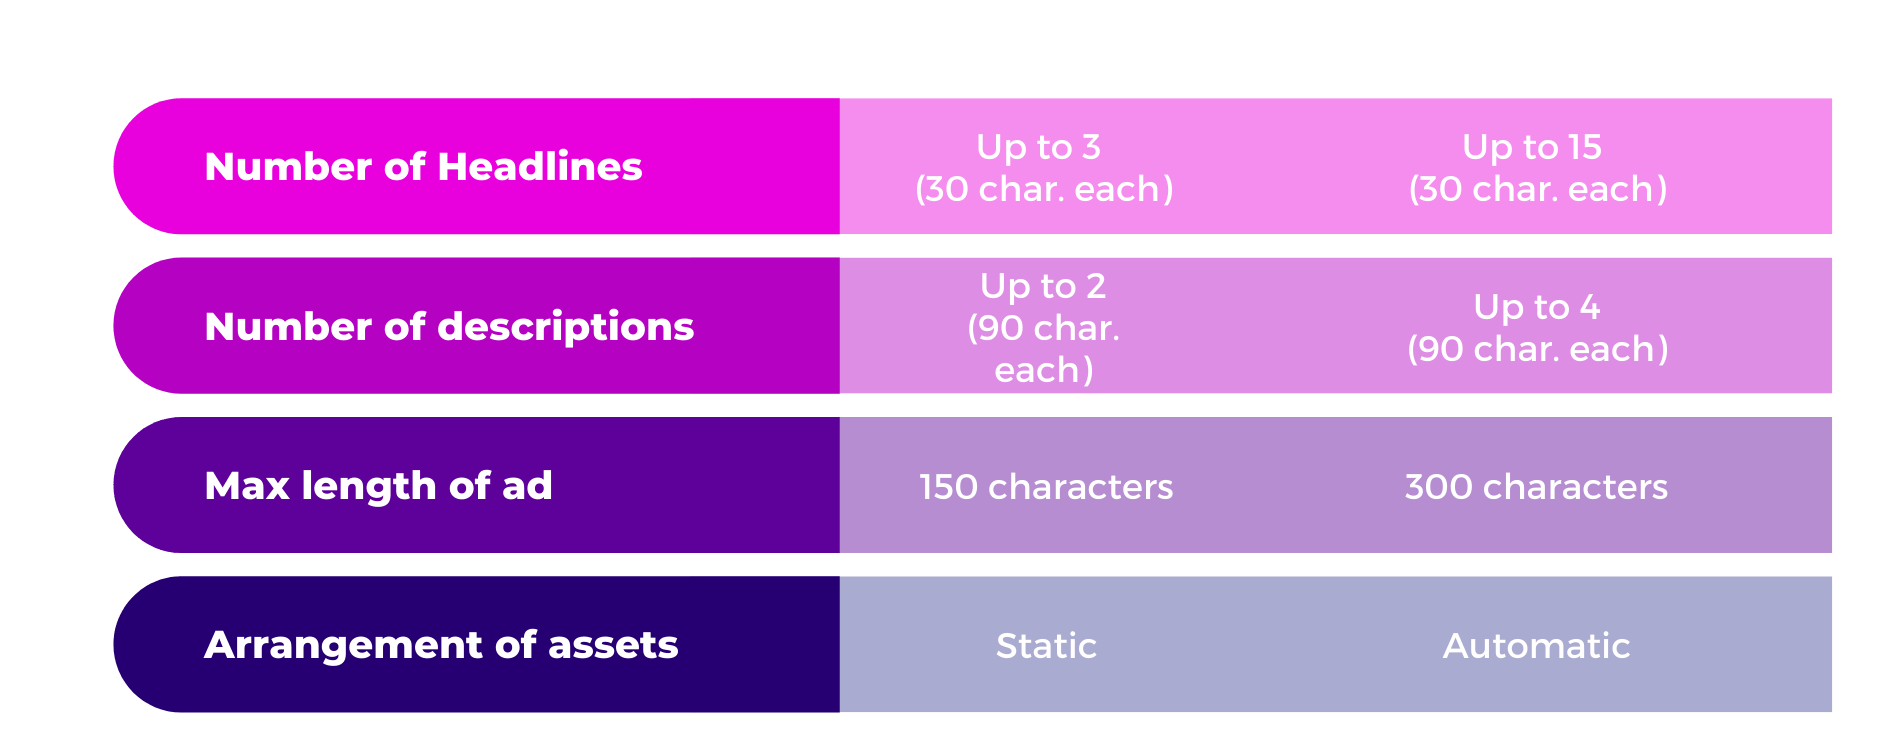 Expanded Text Ads vs Responsive Search Ads